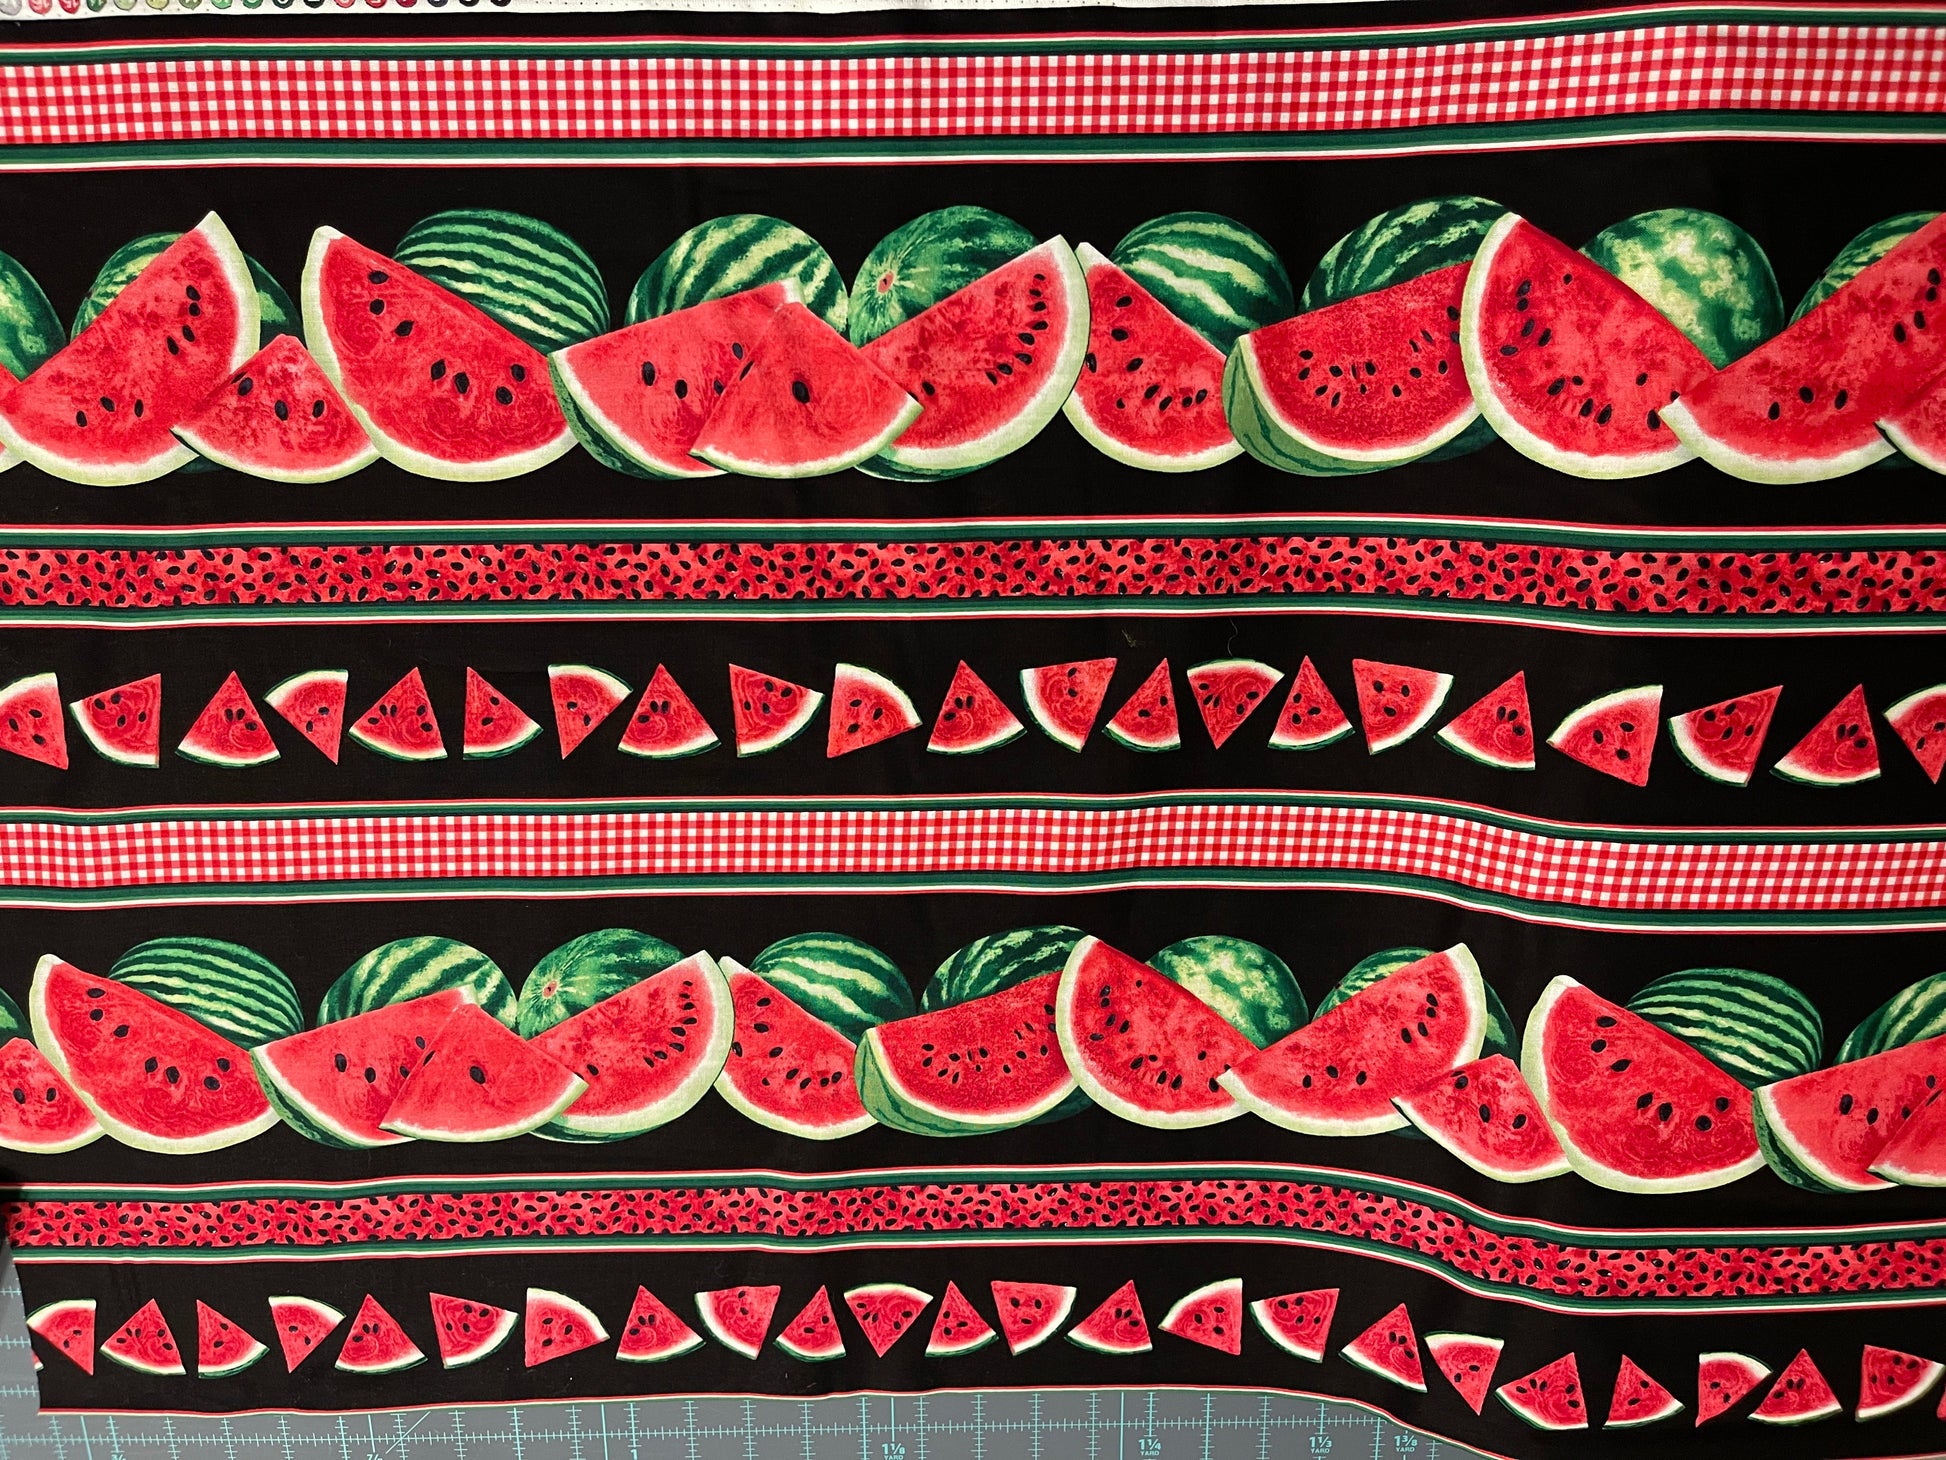 Timeless Treasures Fabric Watermelon Fabric Bundles (10 pieces) by Timeless Treasures (FQ, 1/2 yard & 1 yard choices)